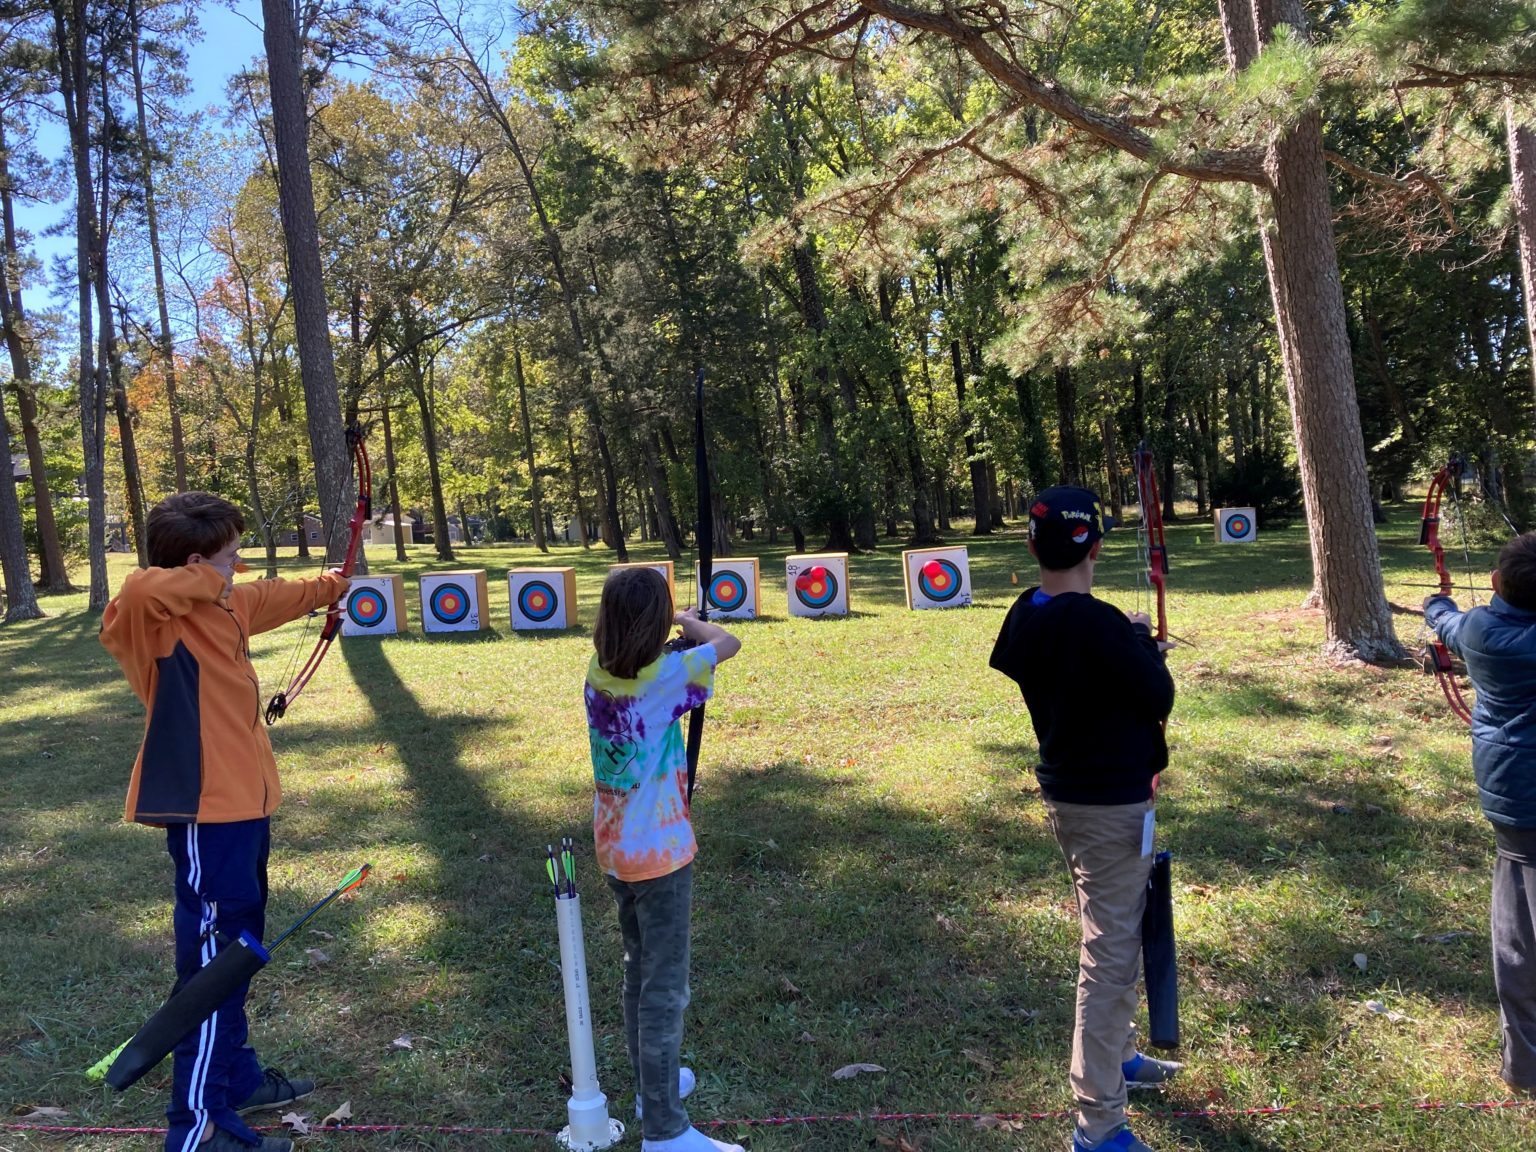 students practicing archery at a park